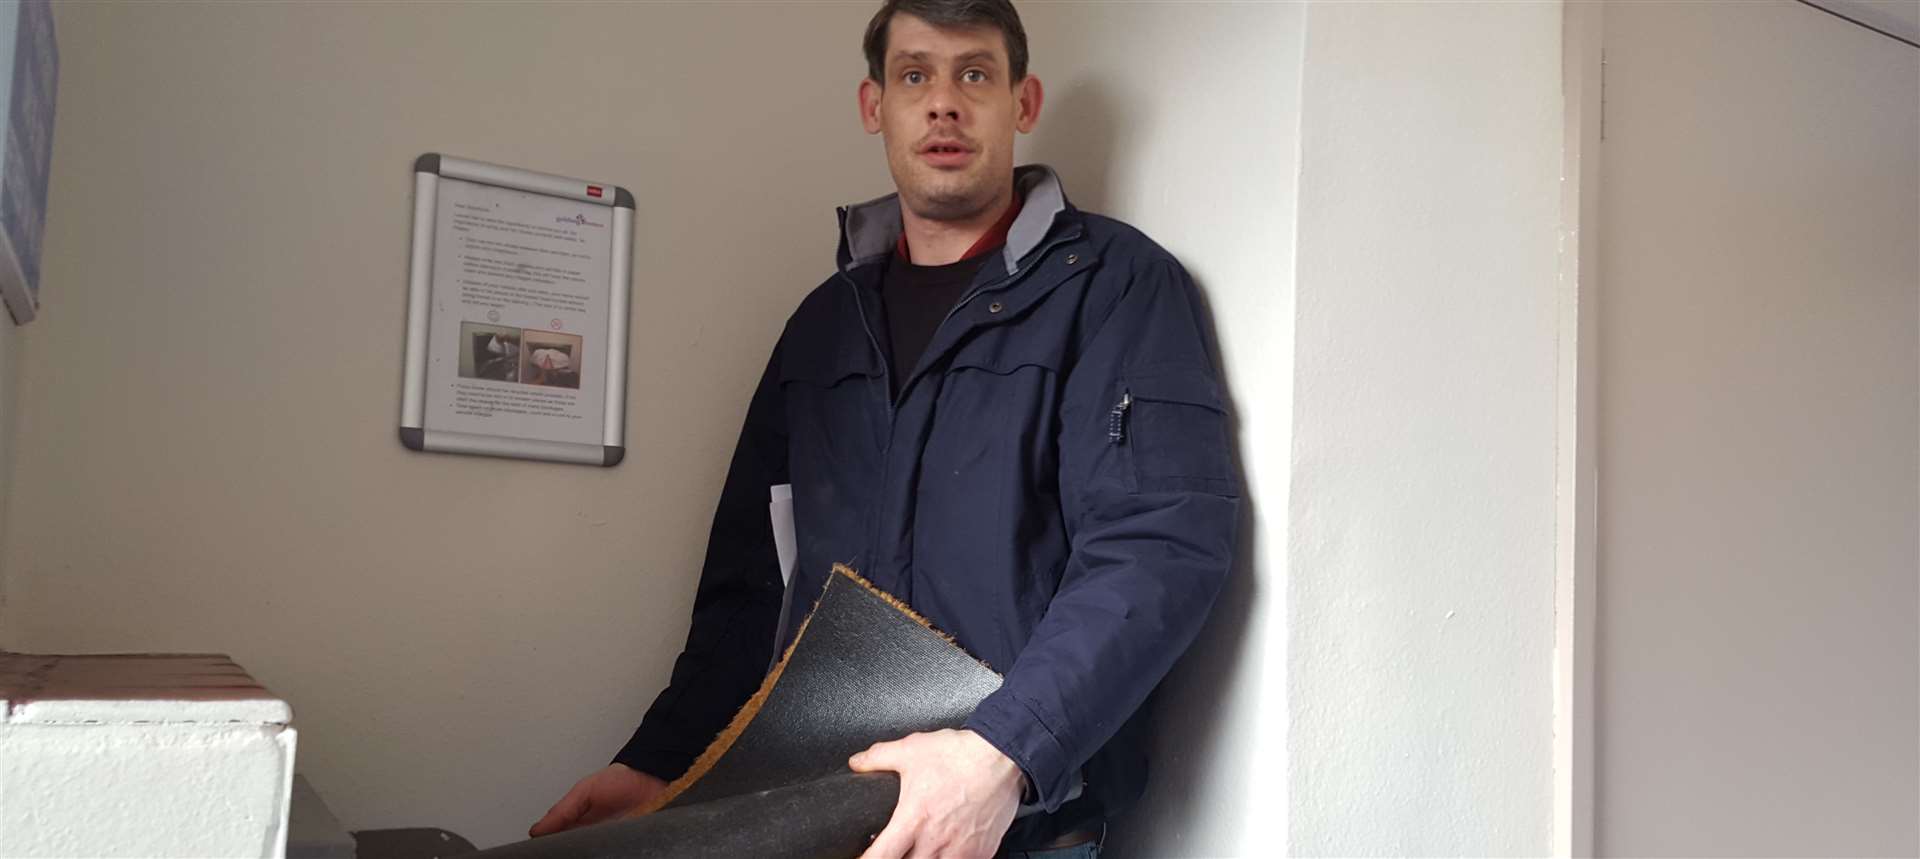 Paul Gower, Midhurst Court resident who got rid of his doormat after being told to remove it from the hallway by Golding Homes